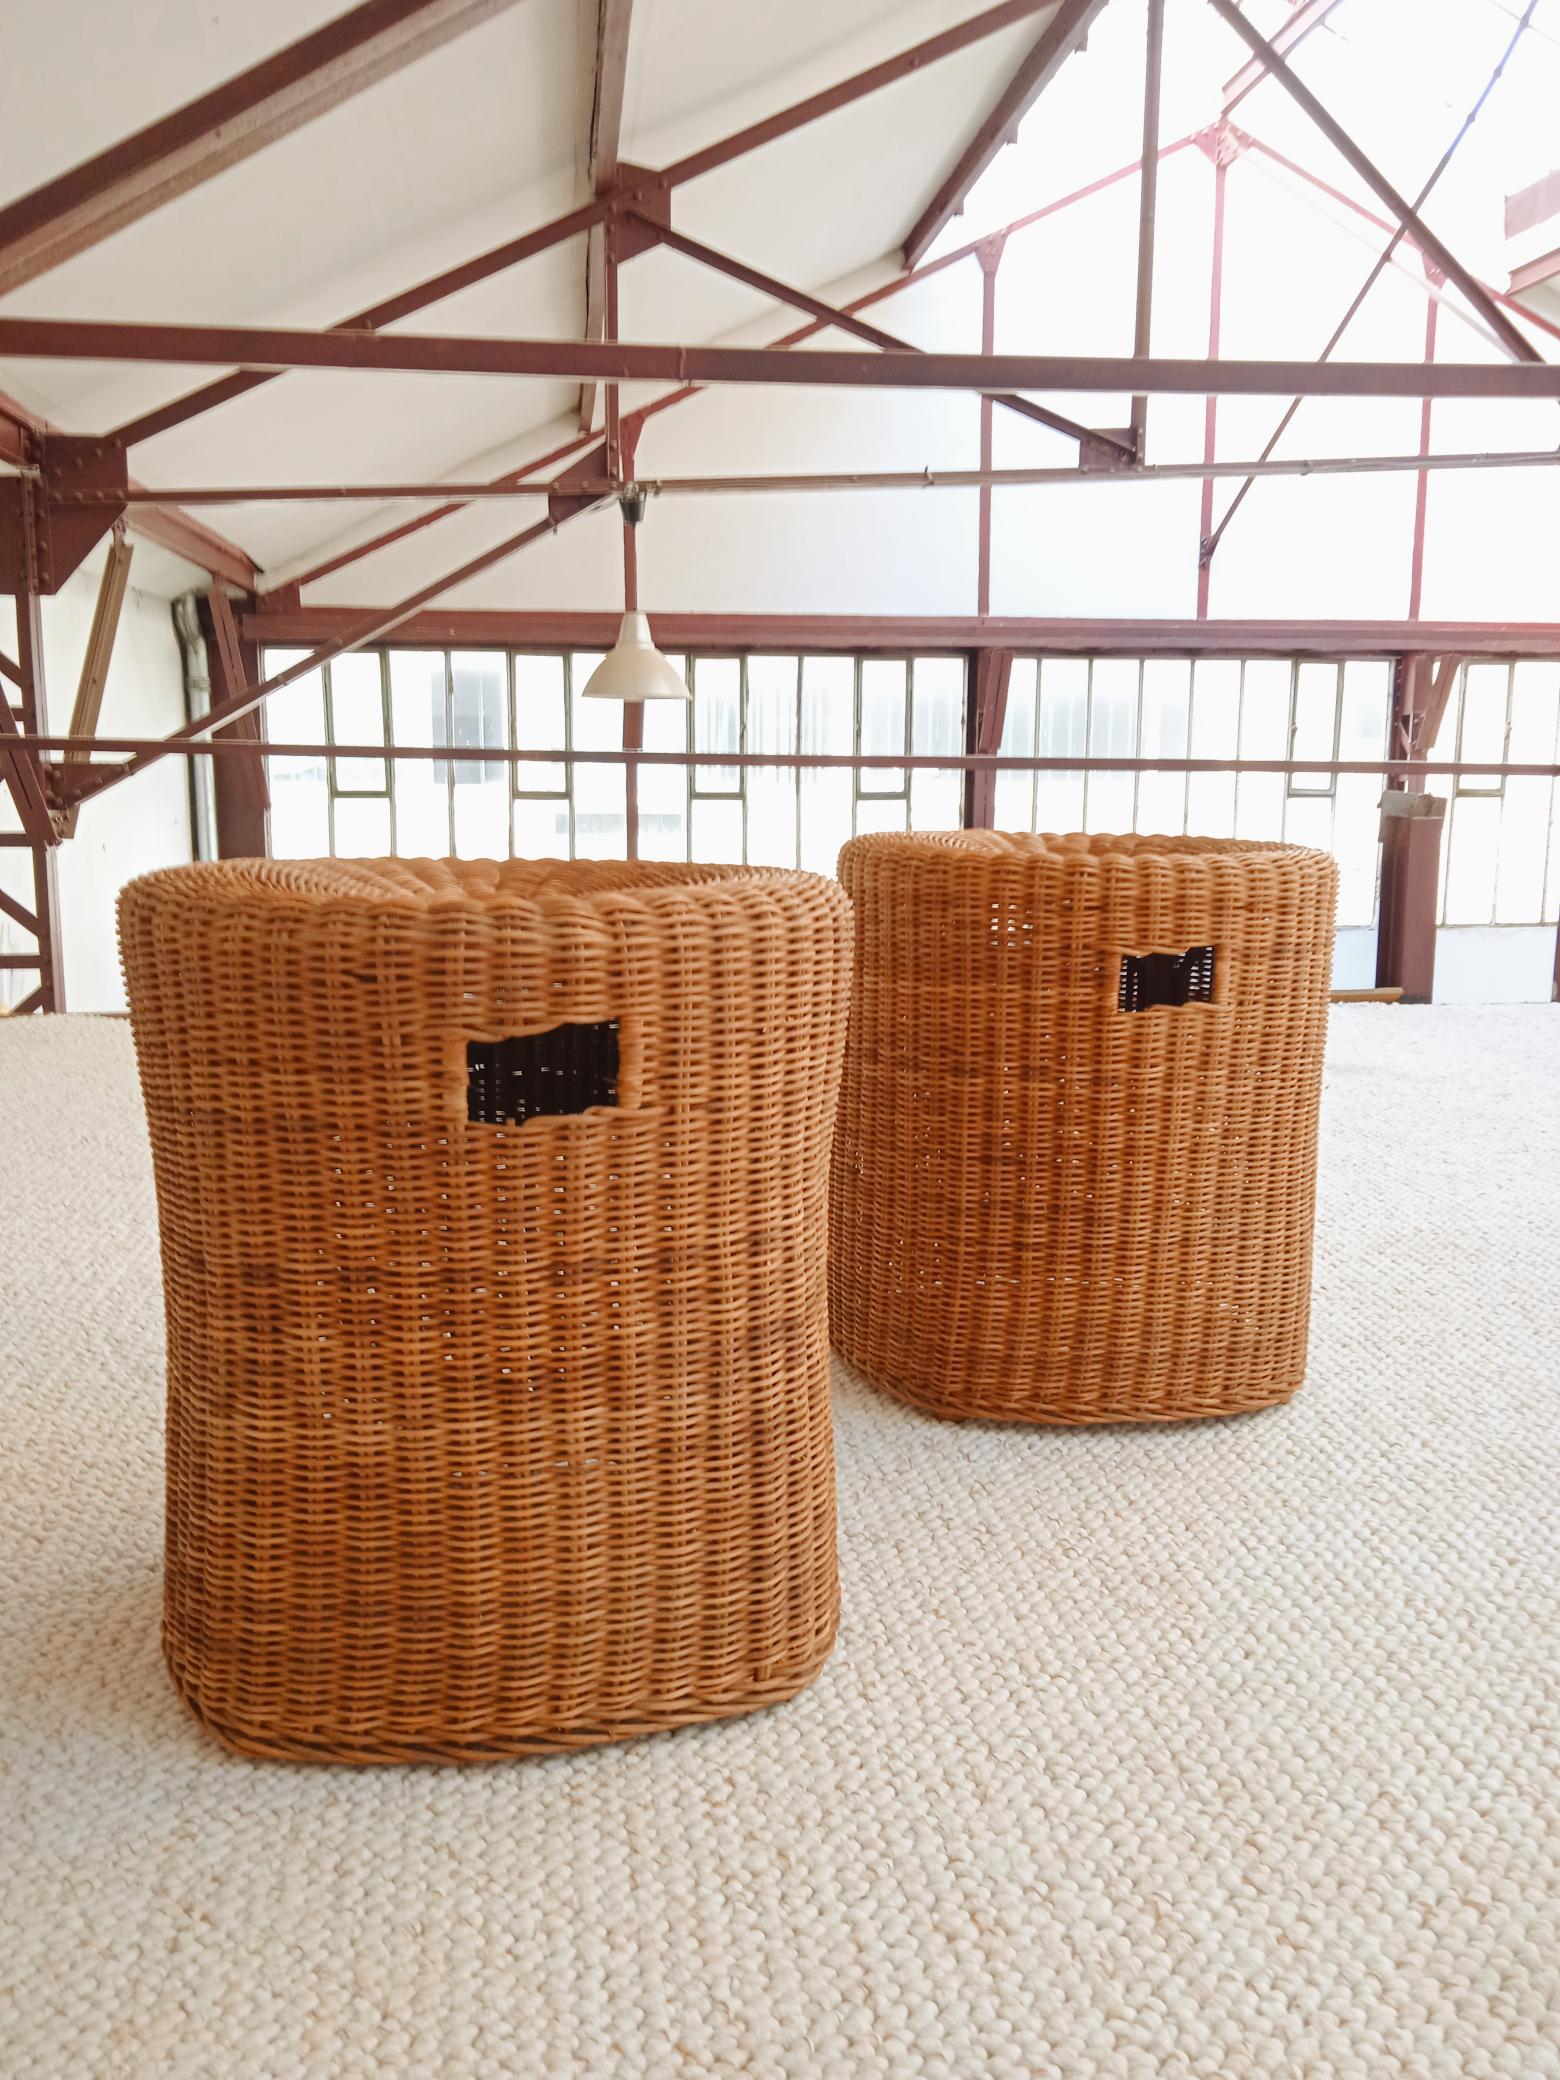 Very nice rattan set consisting of a circular table with a glass top and mushroom foot and 2 stools. A beautiful vintage table, elegant, stable and comfortable for 4 people.